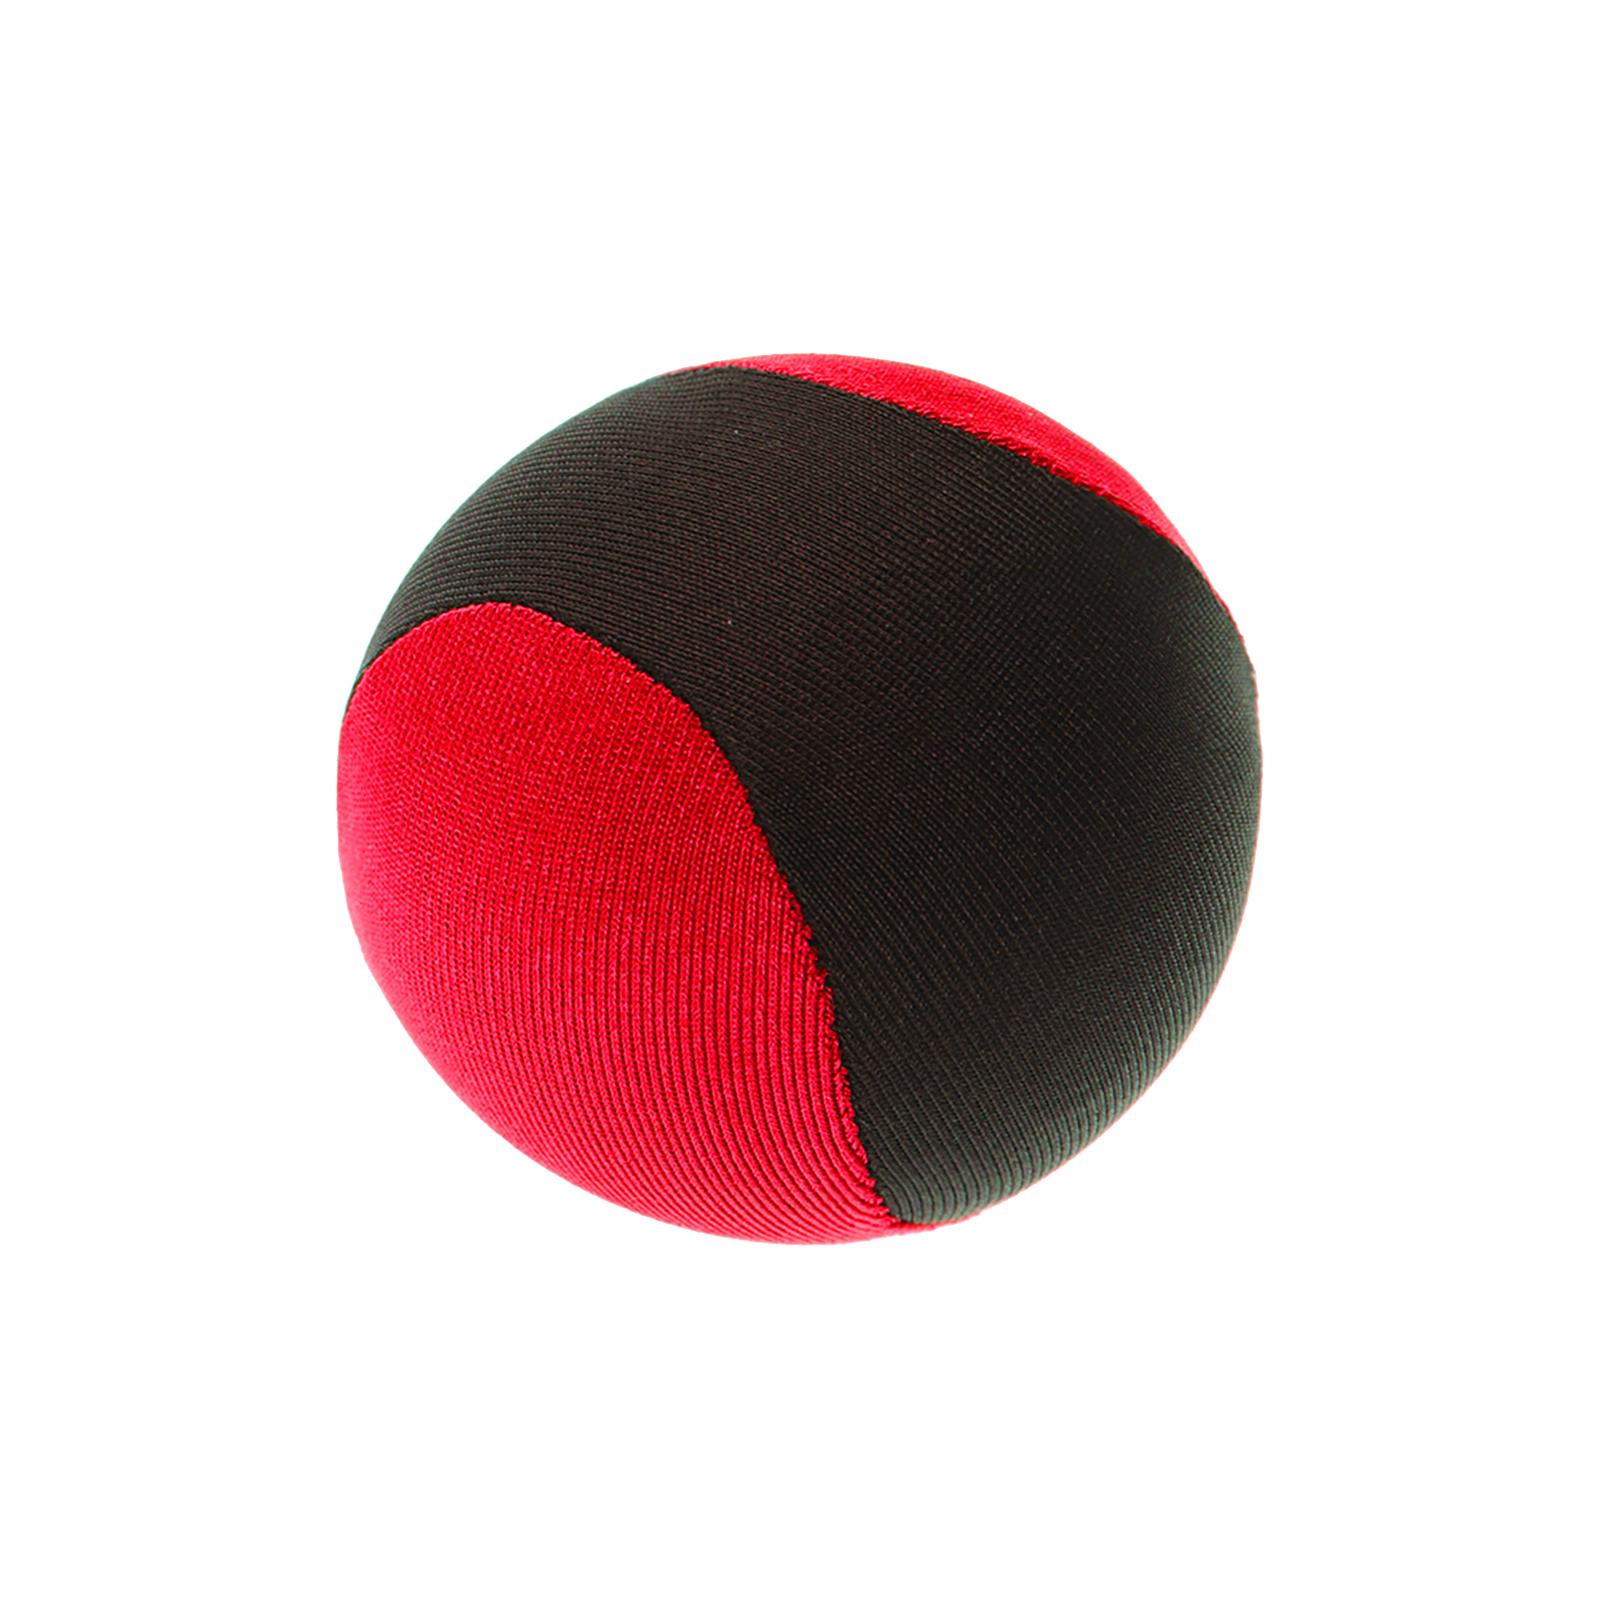 Bouncing Ball Sensory Toy Soft Relax Skipping Ball for Games Holiday Outdoor Red 60mm